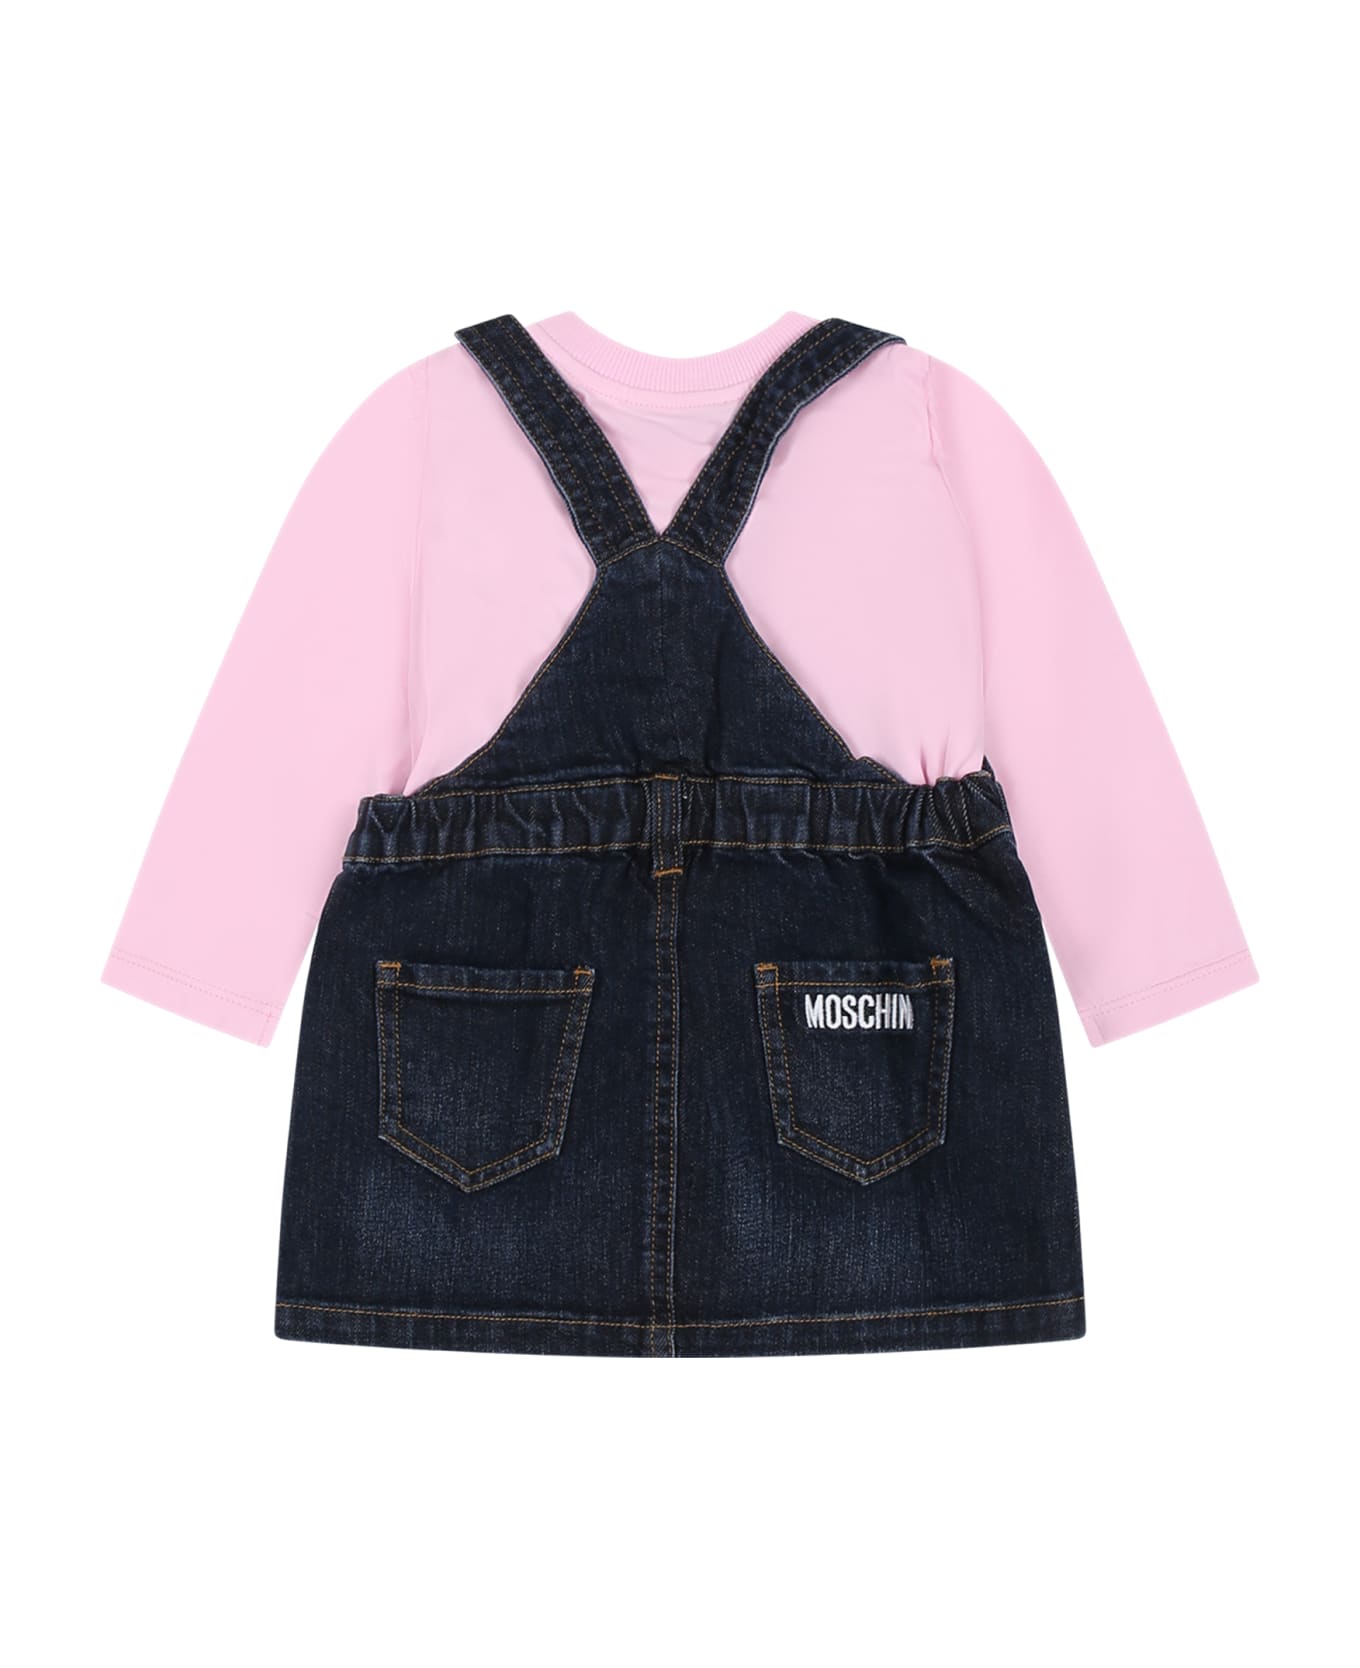 Moschino Blue Suit For Baby Girl With Teddy Bear And Logo - Denim